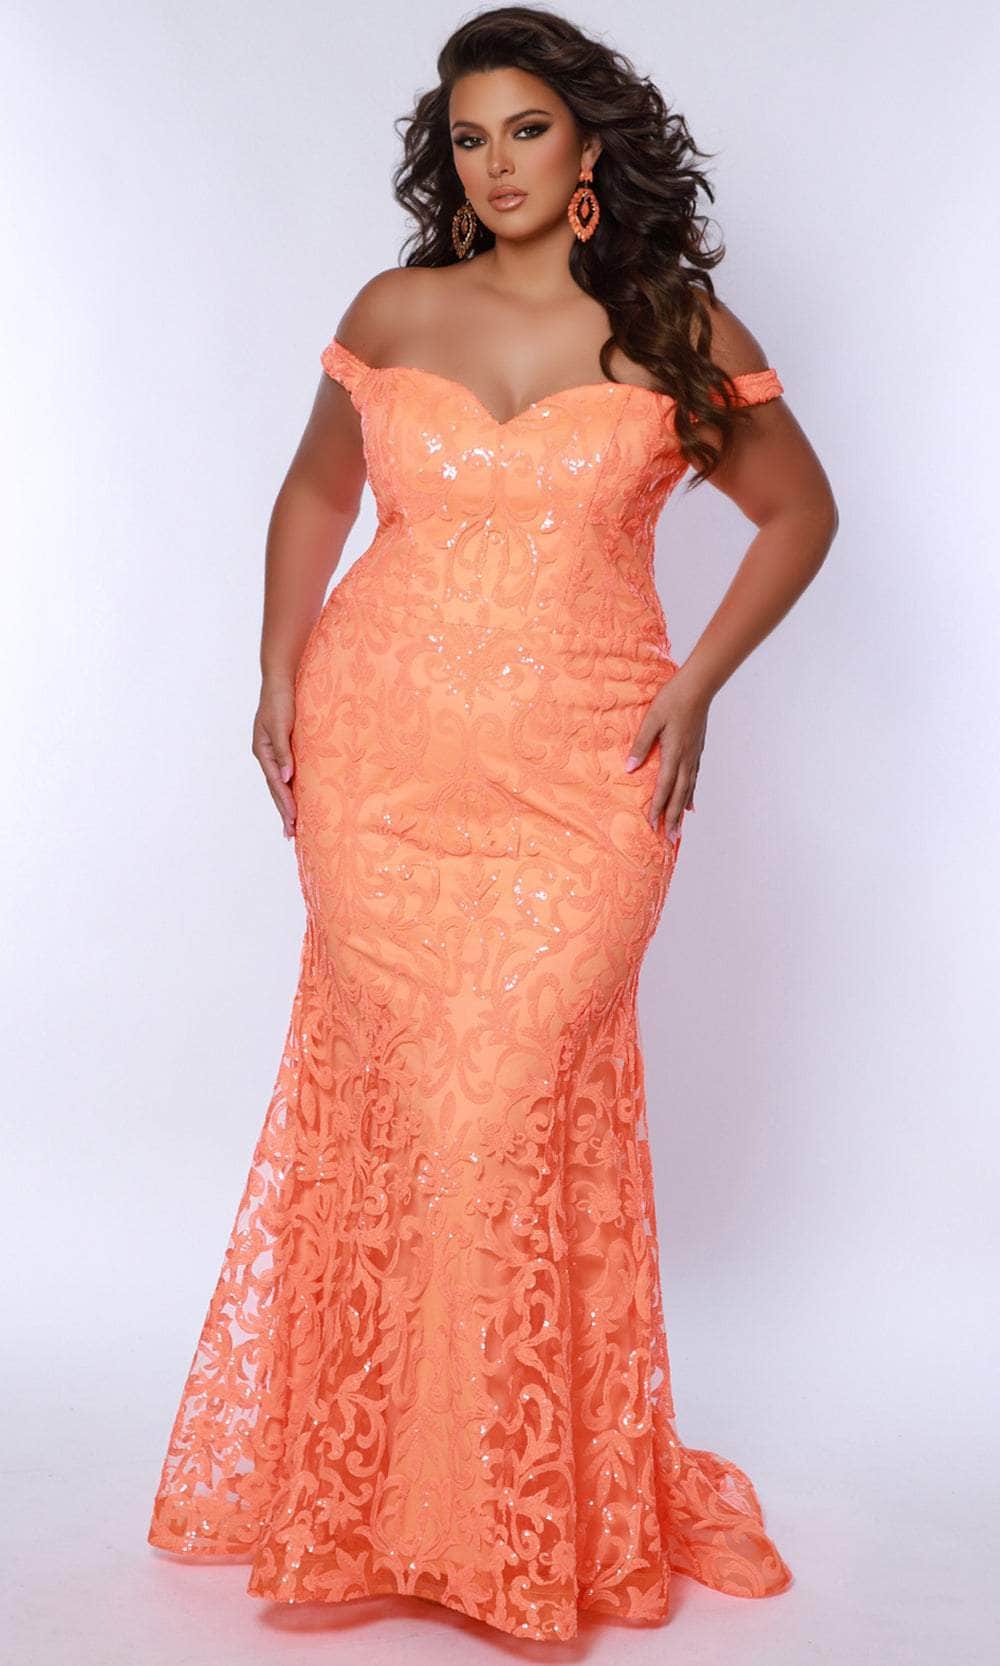 Sydney's Closet SC7372 - Sleeveless Sequin Embellished Gown